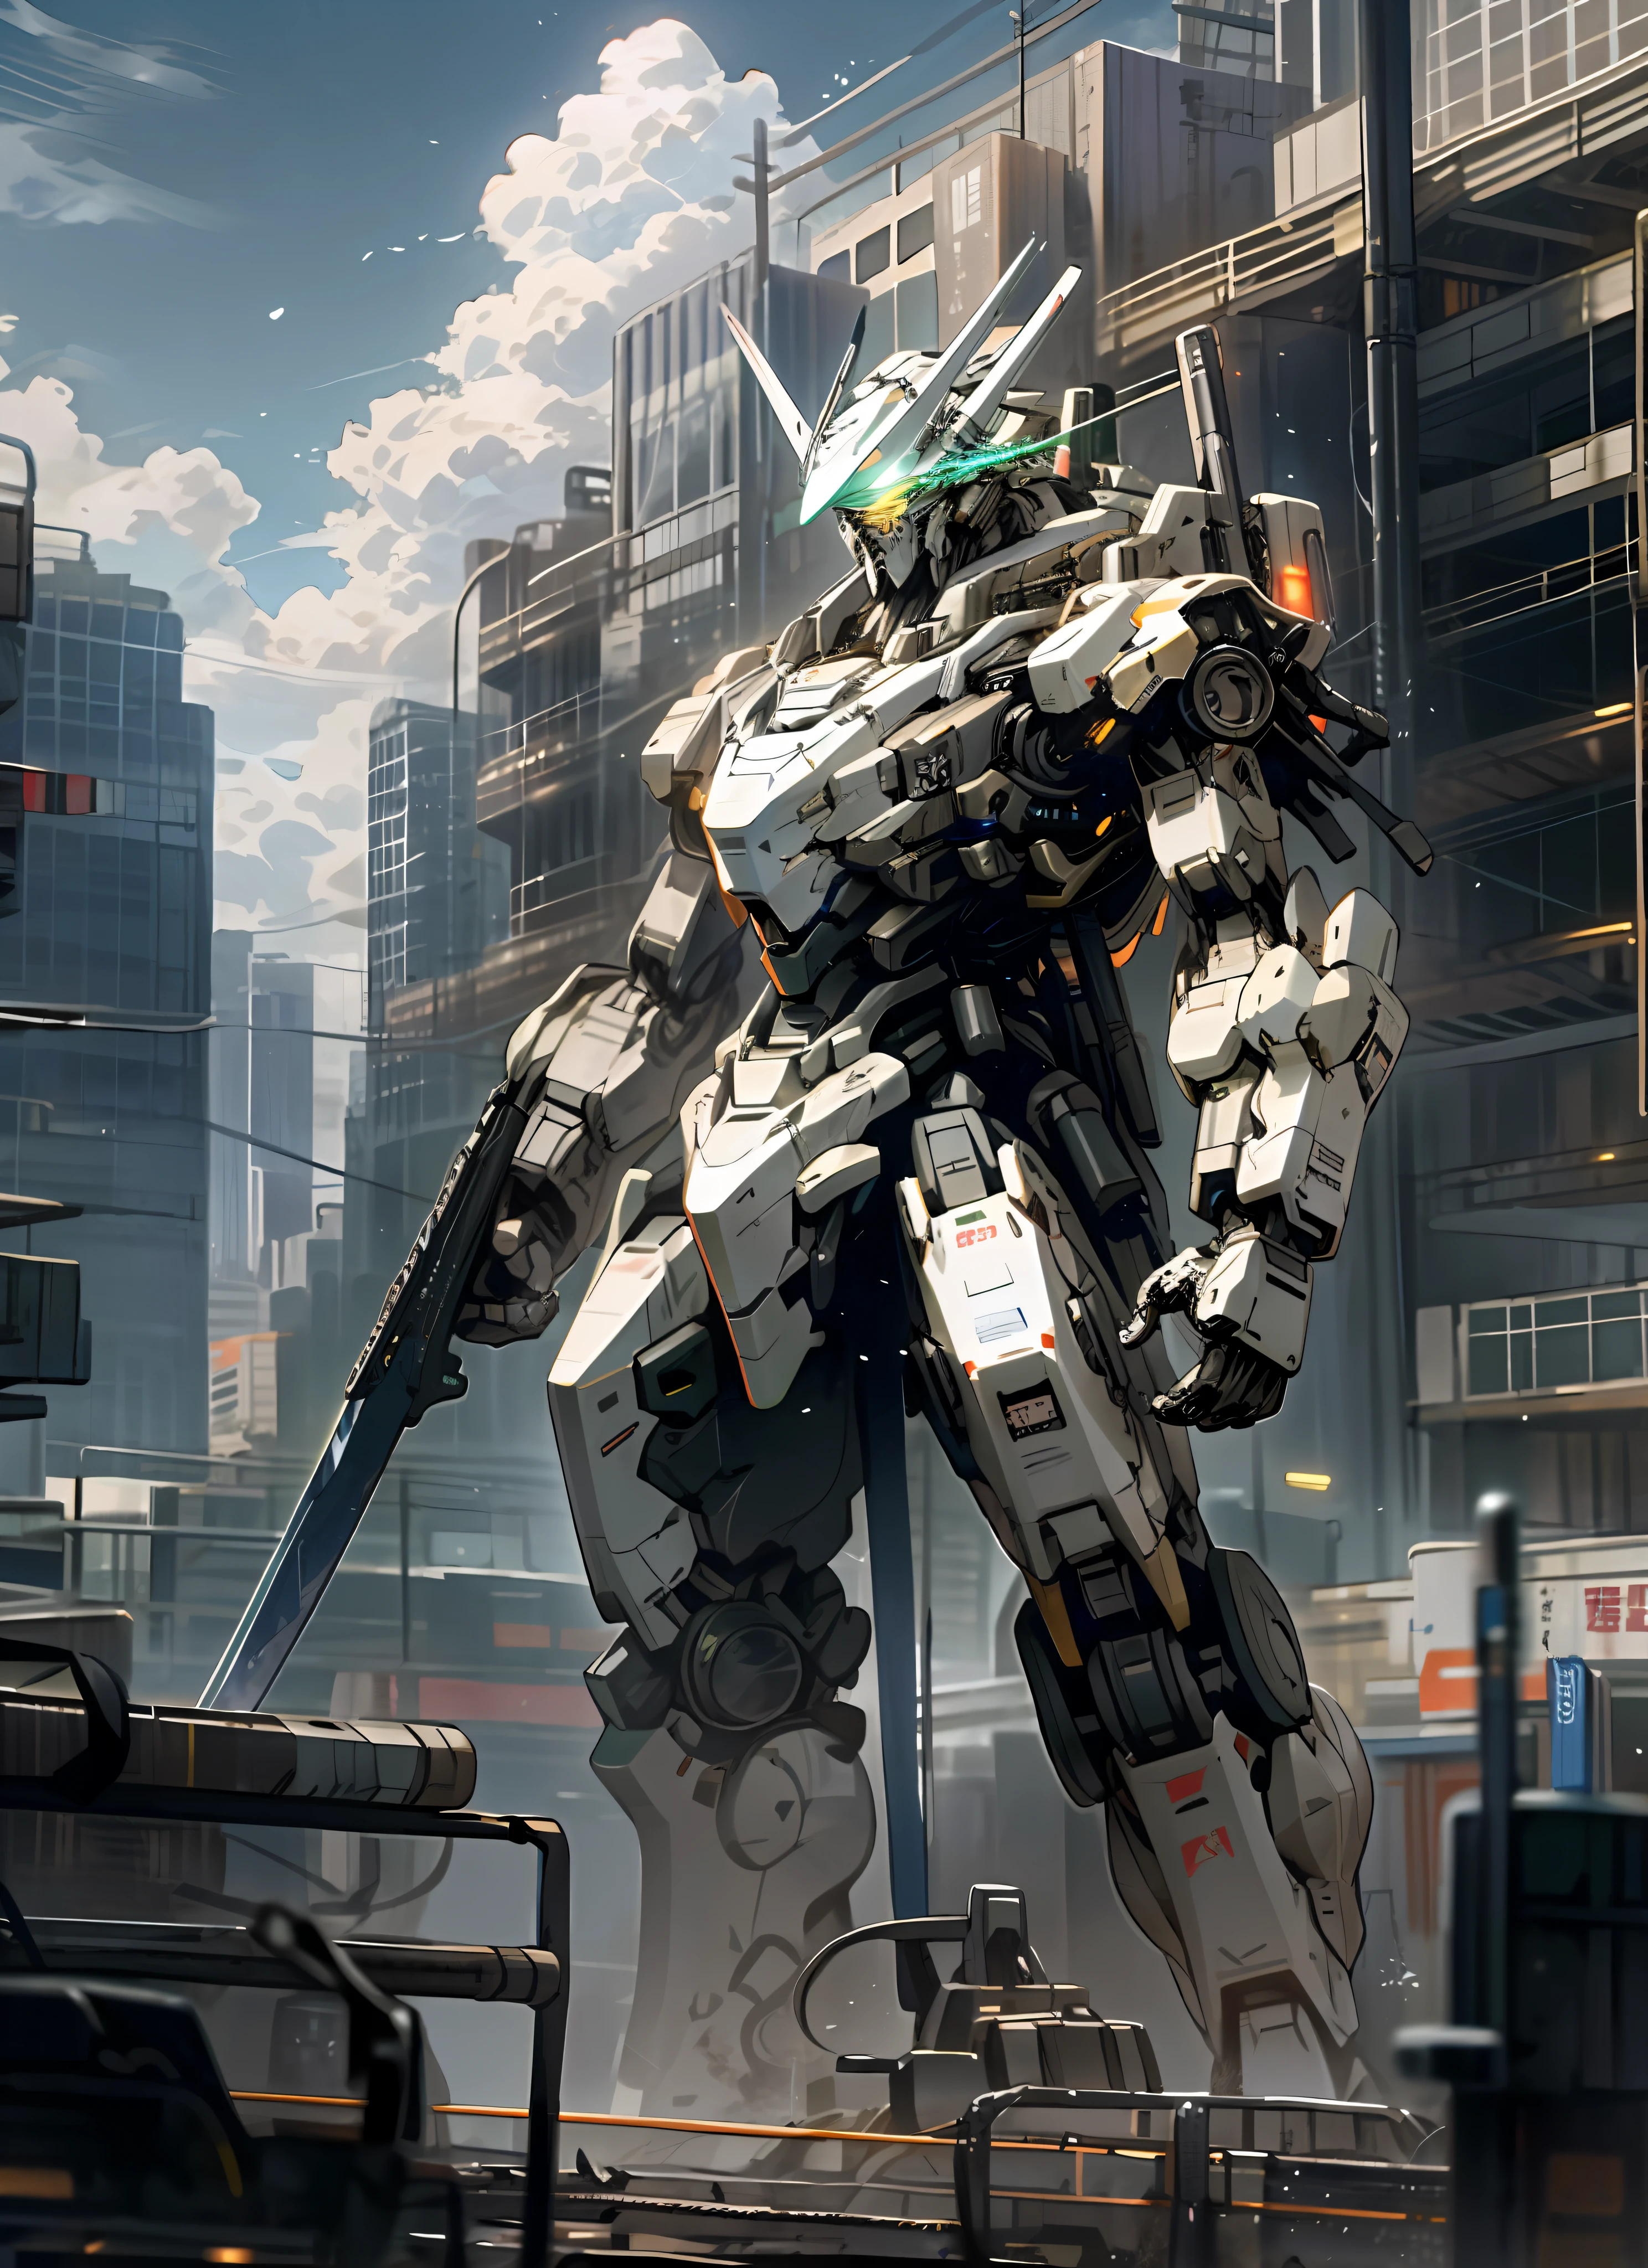 Sky, Clouds, holding_weapon, no_humans, Glow, Robot, Full Figure, Architecture, glowing_eyes, Mecha, Science Fiction, City, Reality, Mecha